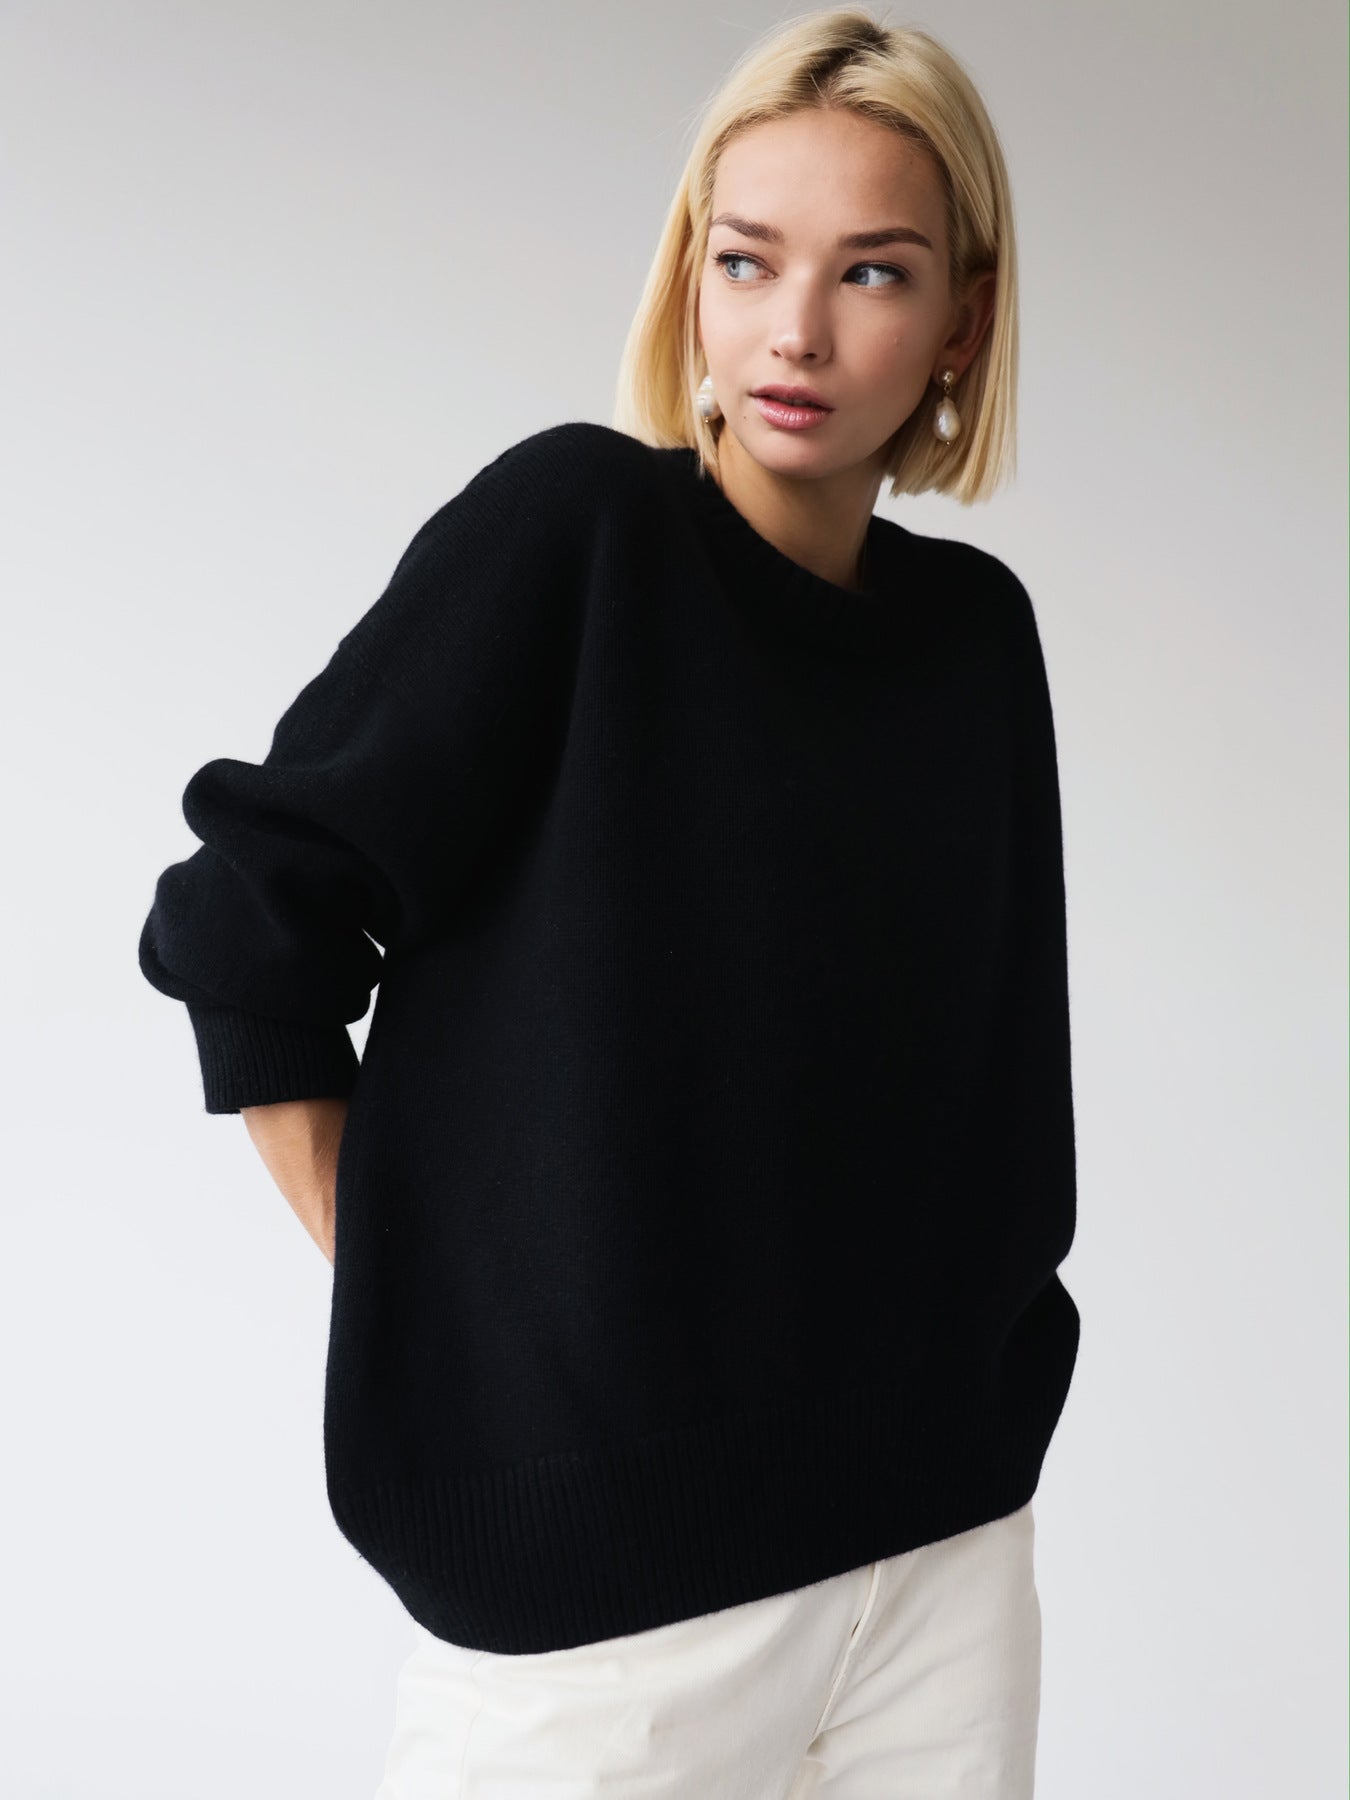 Women's Round Neck Loose Solid Color Knitwear